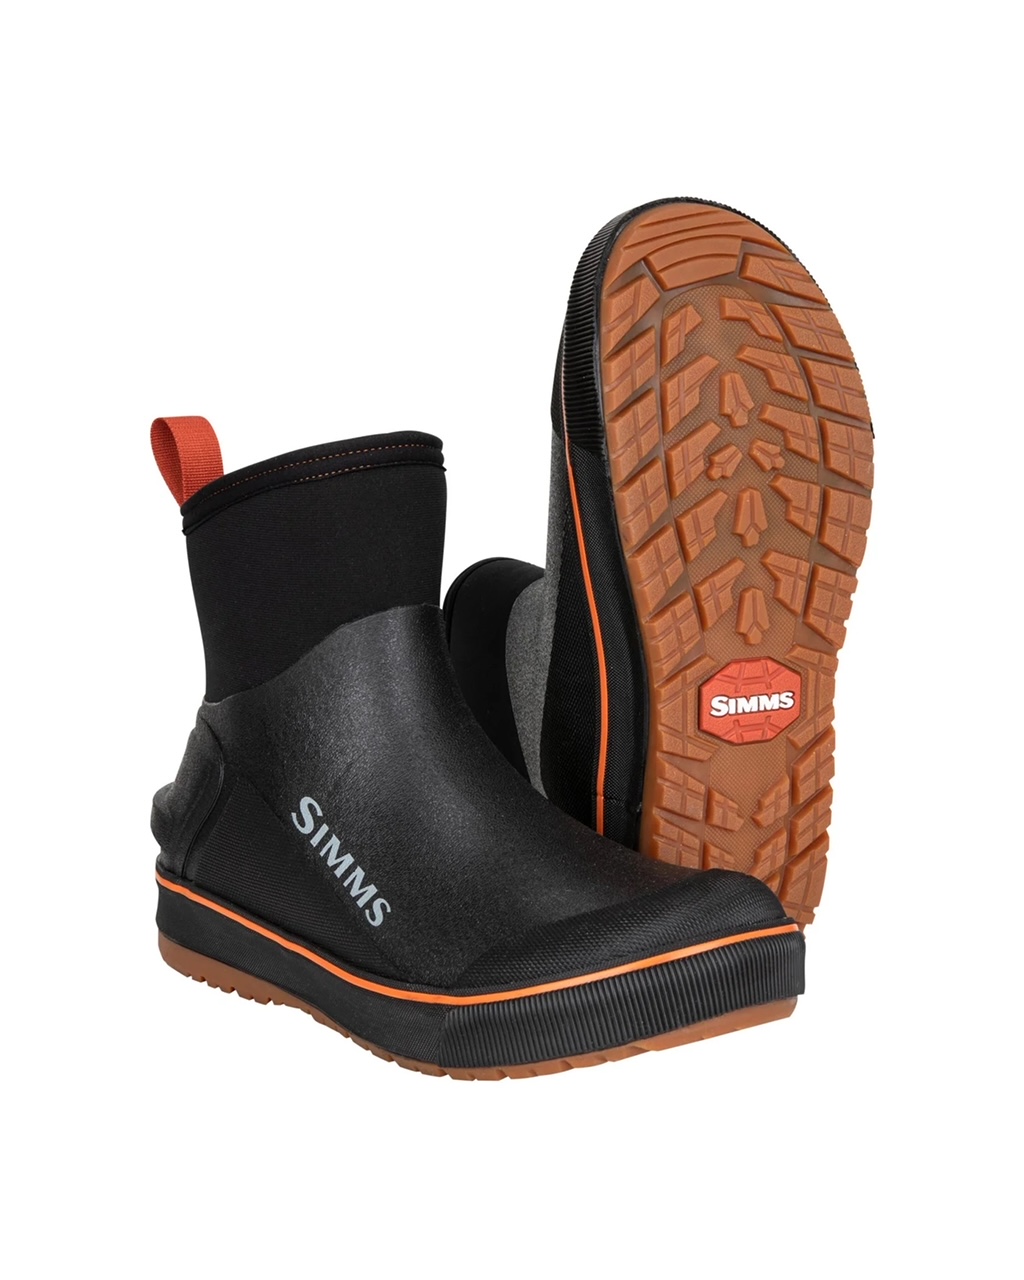 Slip on a pair of soft booties for wader protection while wearing fins or for wet wading. Boat boots with non-slip grip are great for keeping you steady on your feet while on the dock or on the boat.